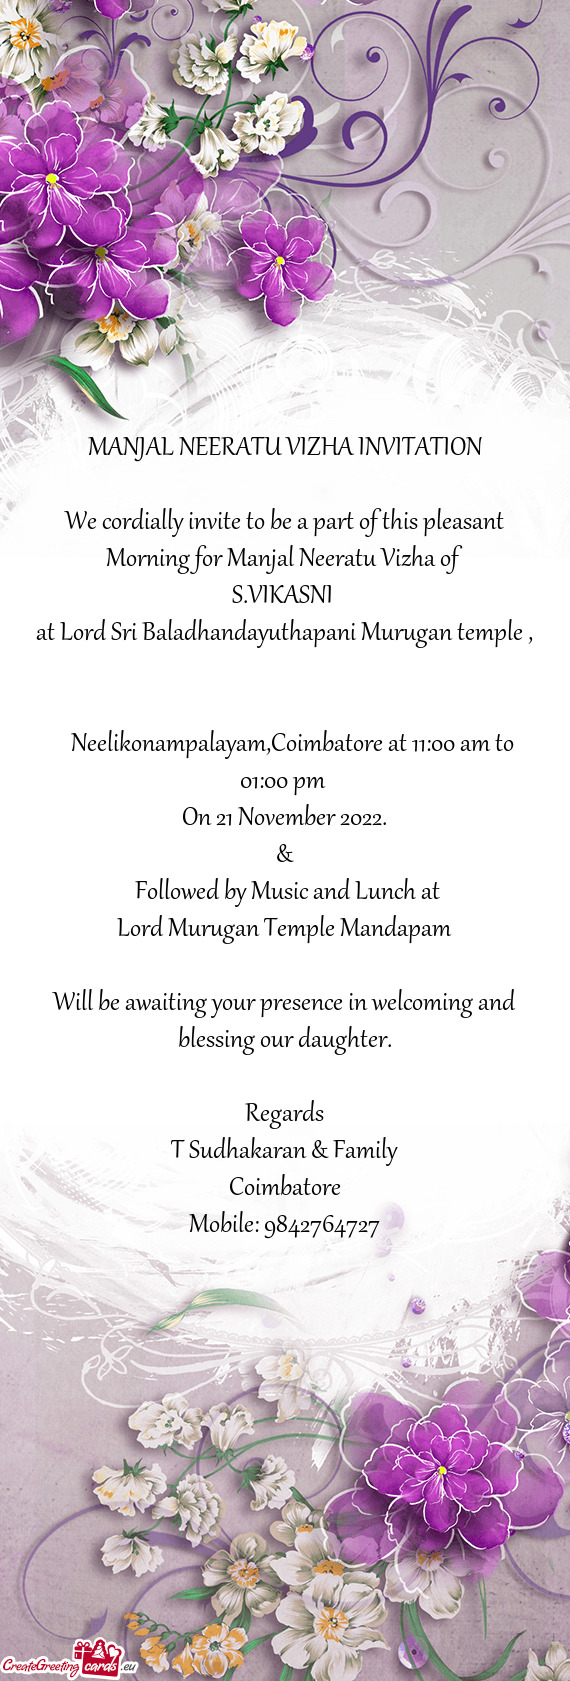 We cordially invite to be a part of this pleasant Morning for Manjal Neeratu Vizha of